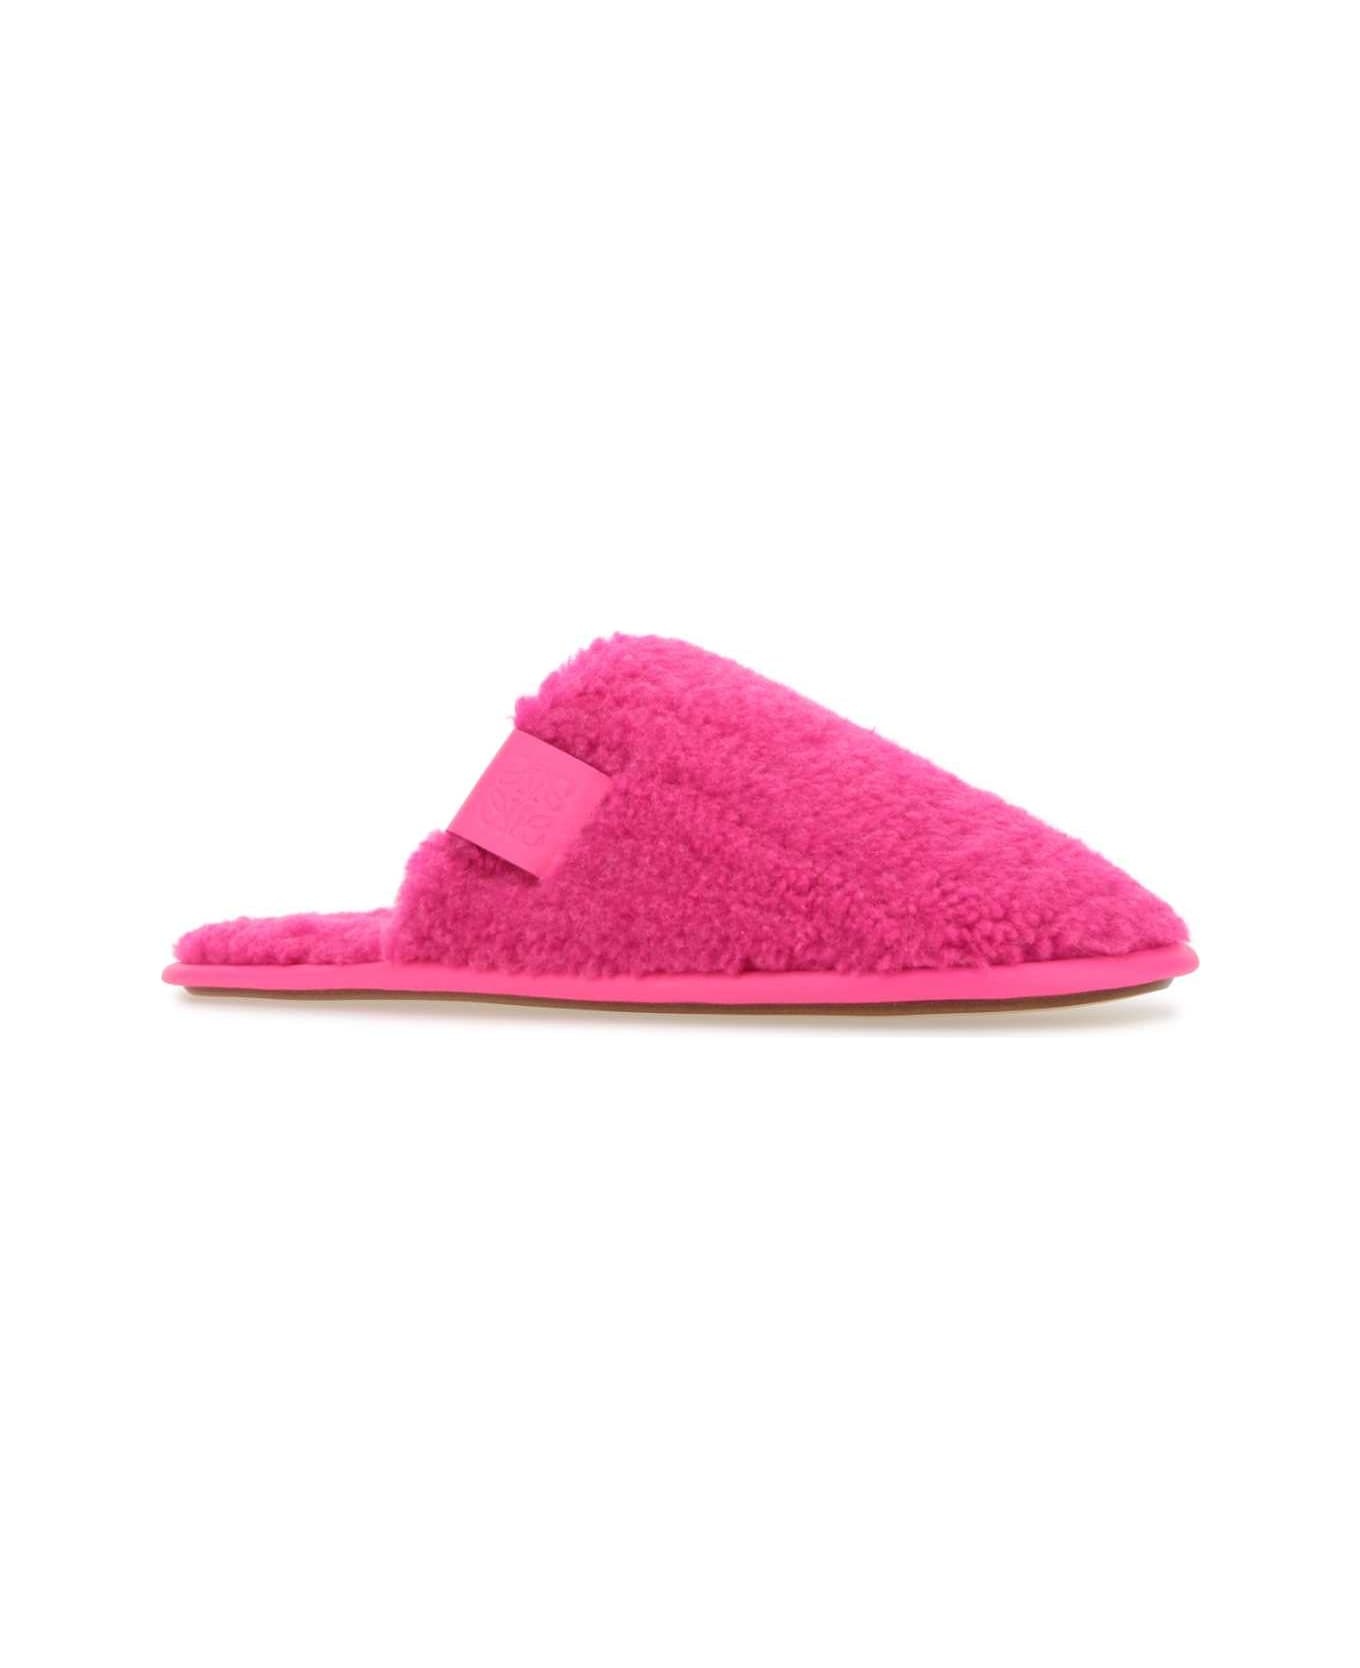 Fluo Pink Pile Slippers - 2